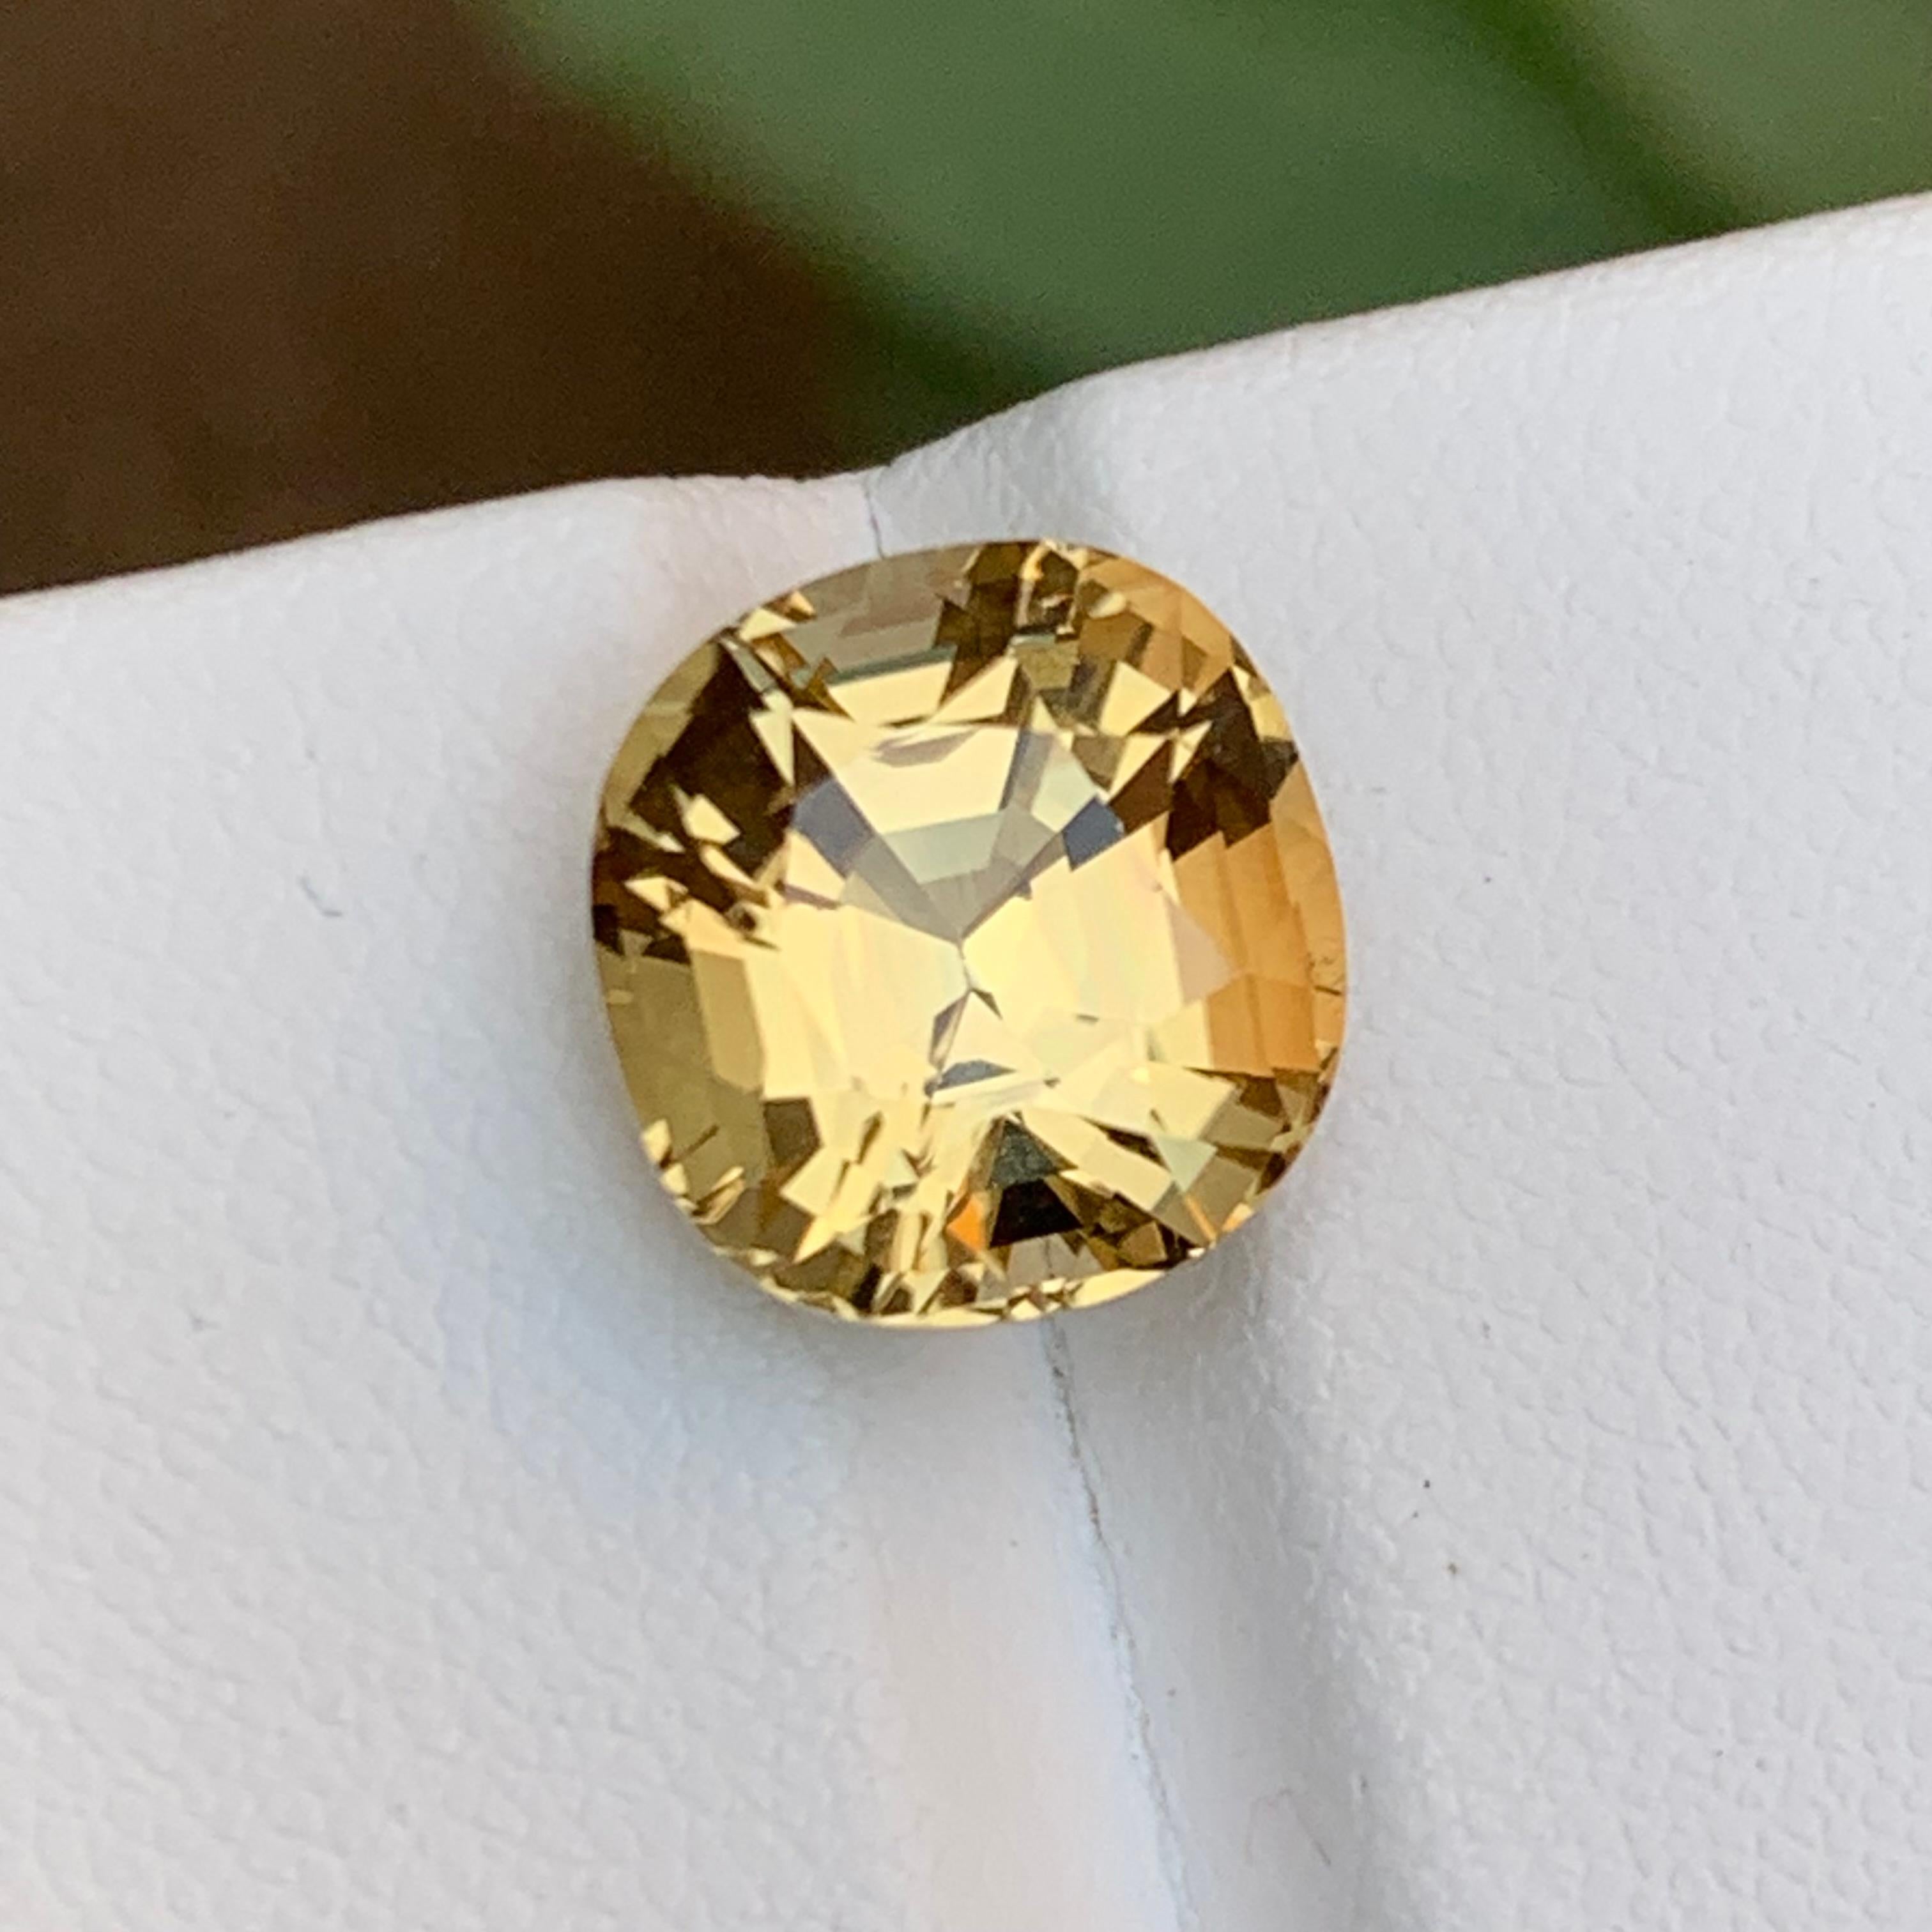 Contemporary Golden Yellow Natural Tourmaline Gemstone, 6.75 Ct Cushion Cut for Ring/Pendant For Sale